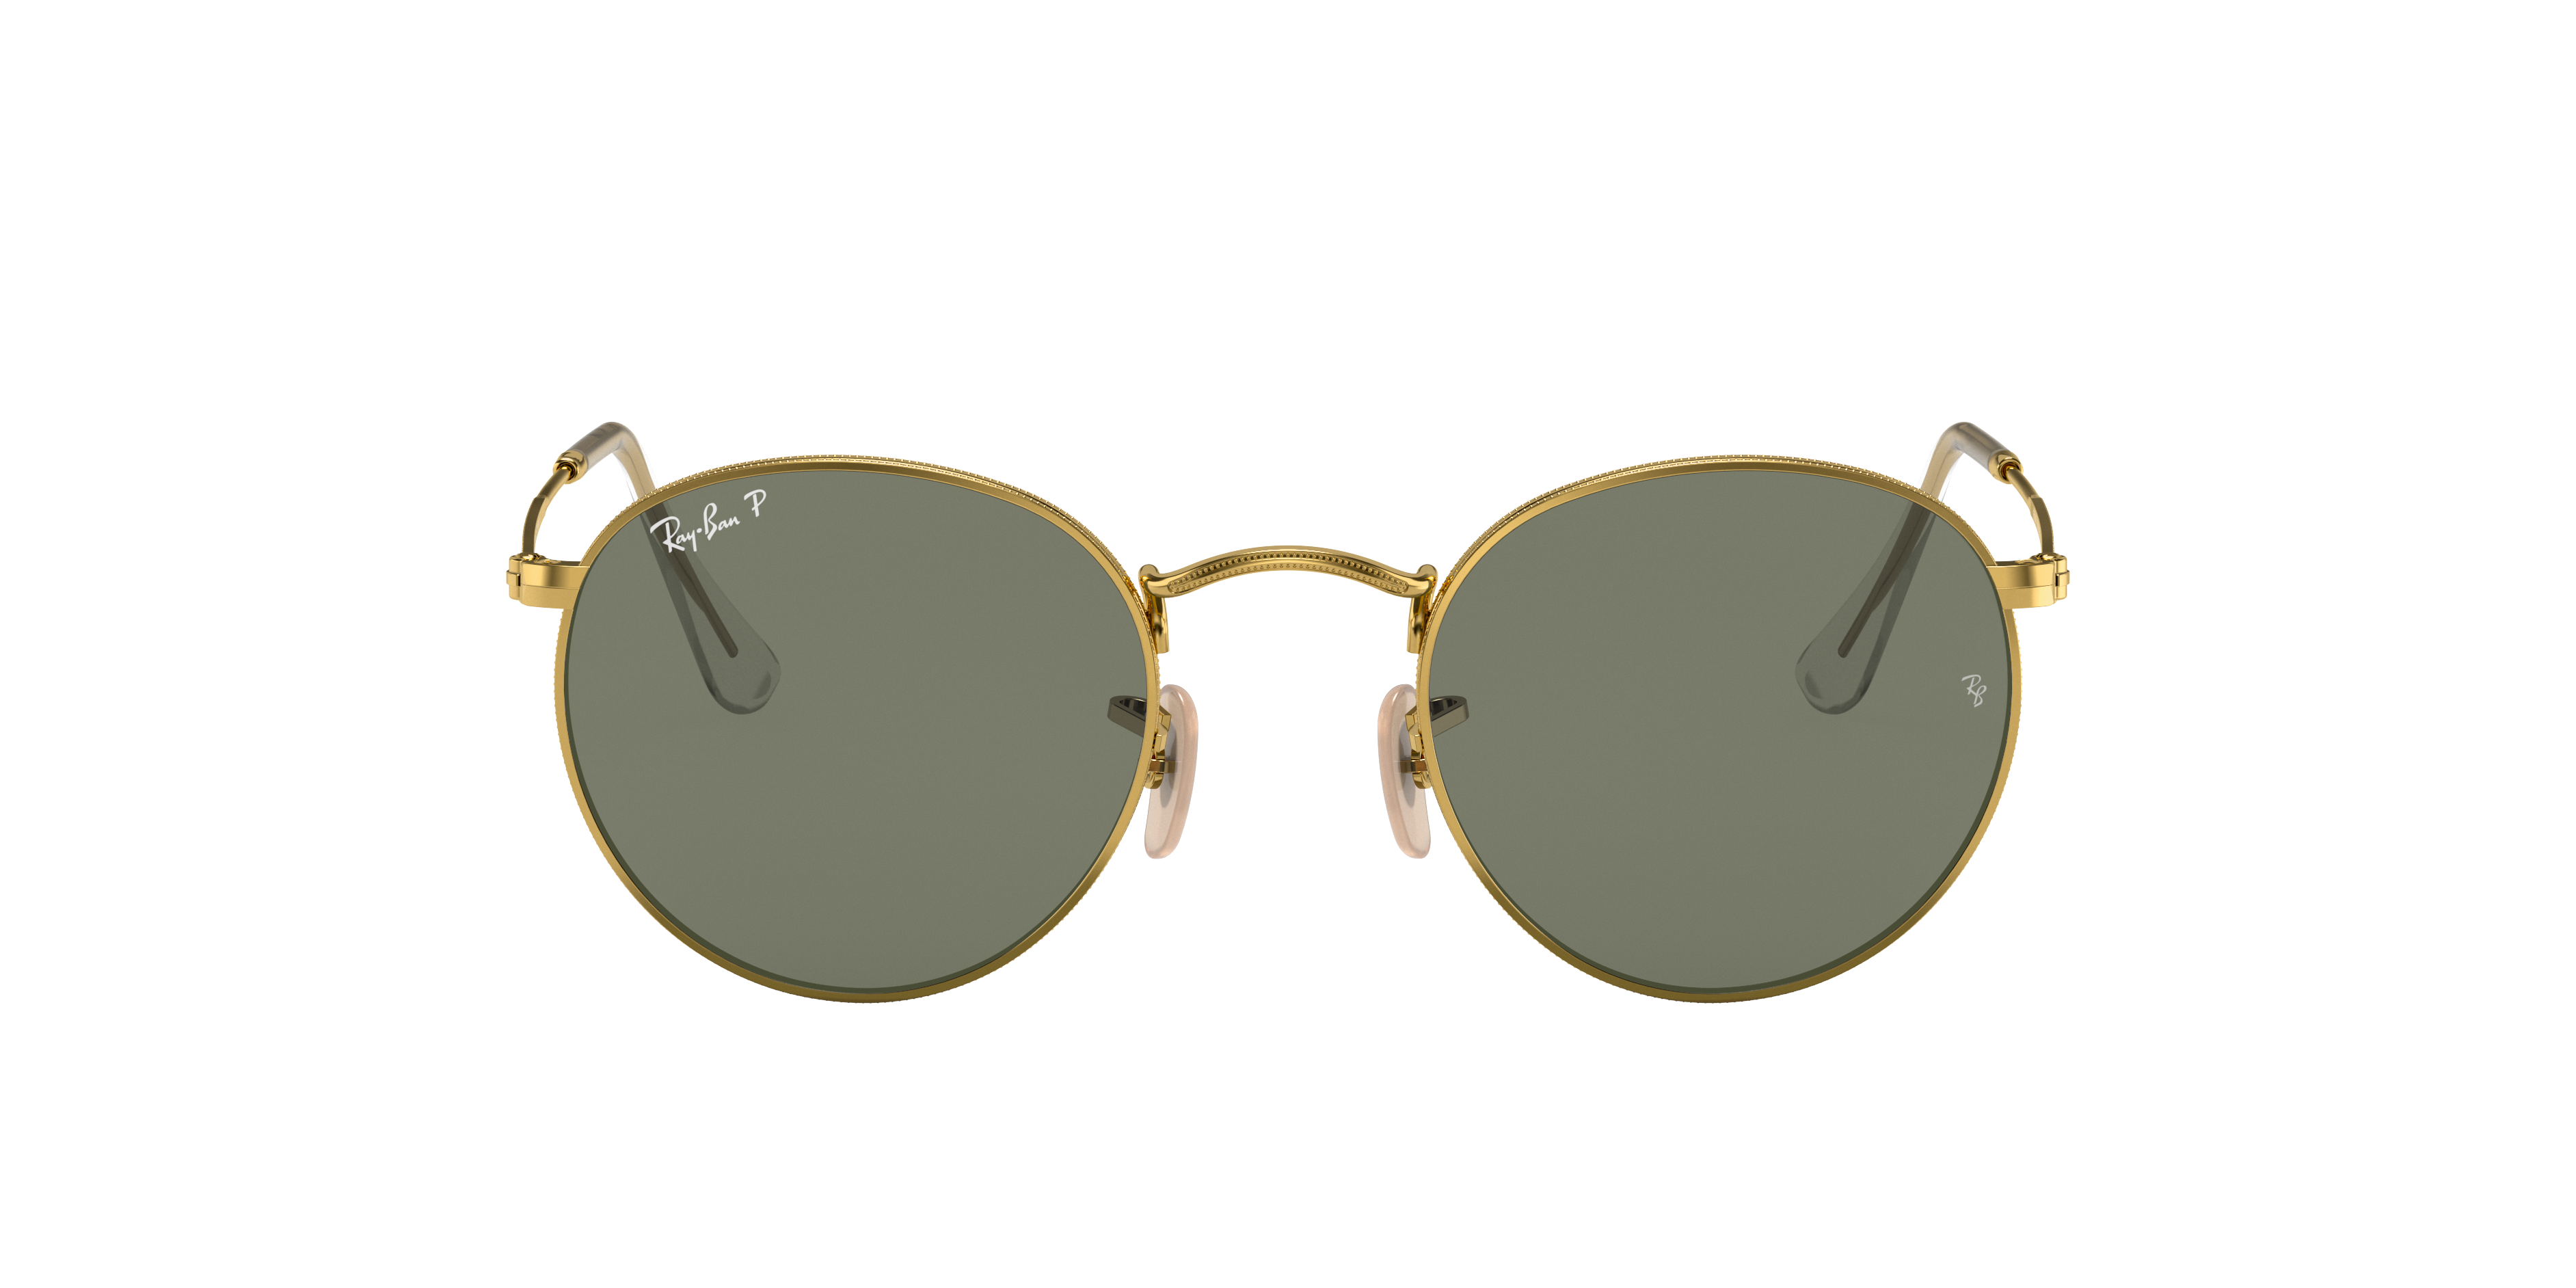 Boutique officielle Ray-Ban® France